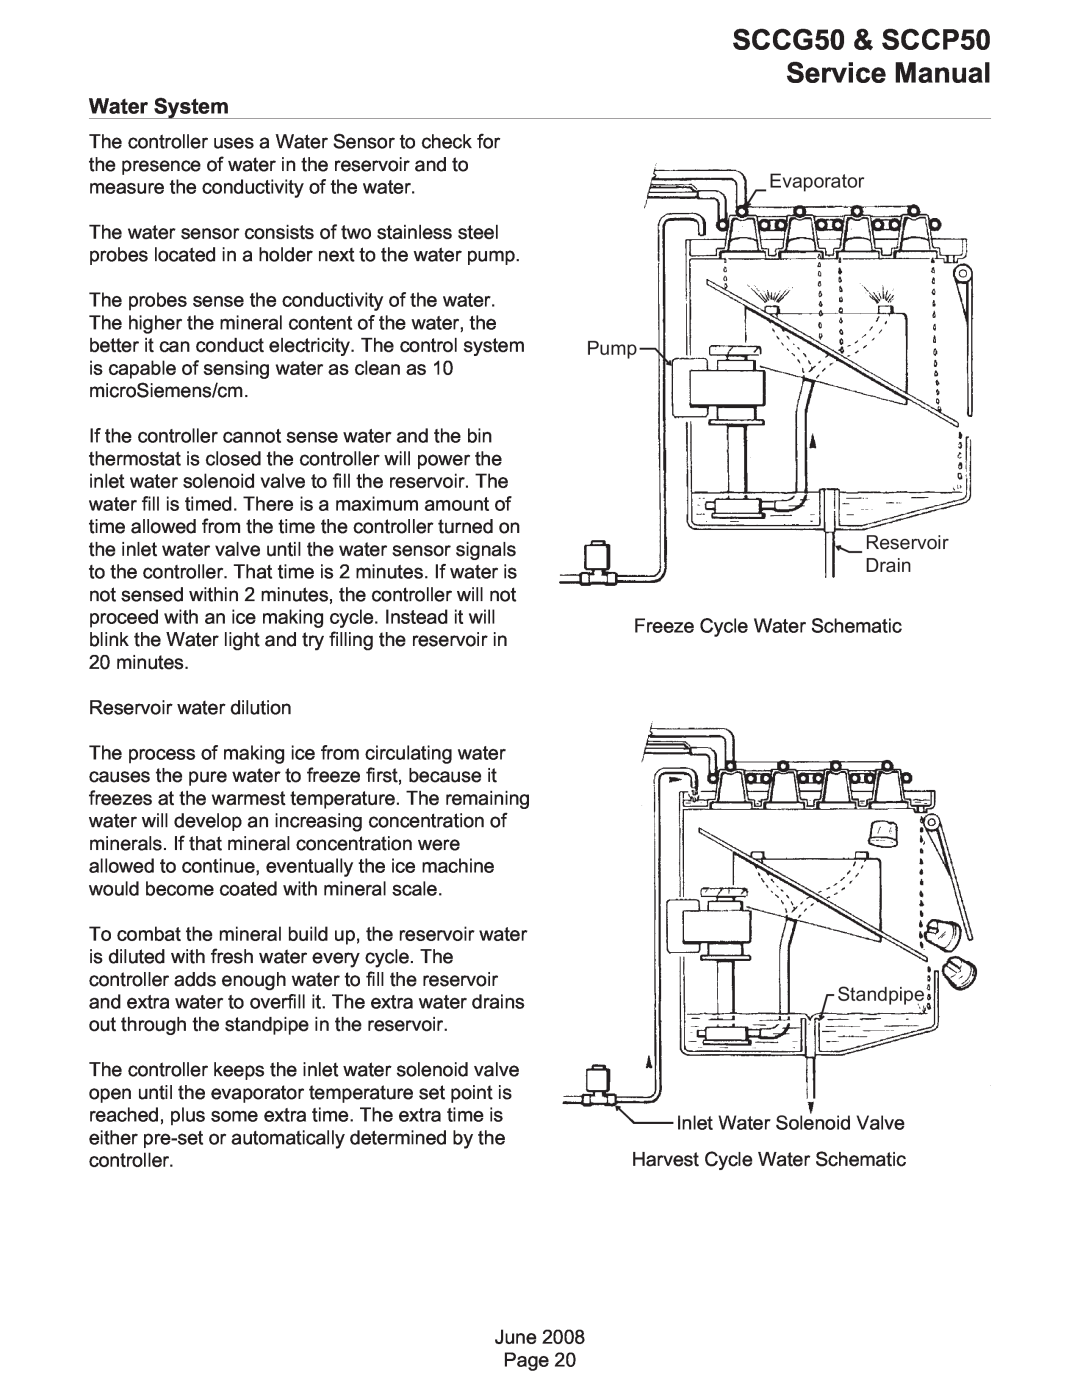 Scotsman Ice SCCG50, SCCP50 service manual Water System 